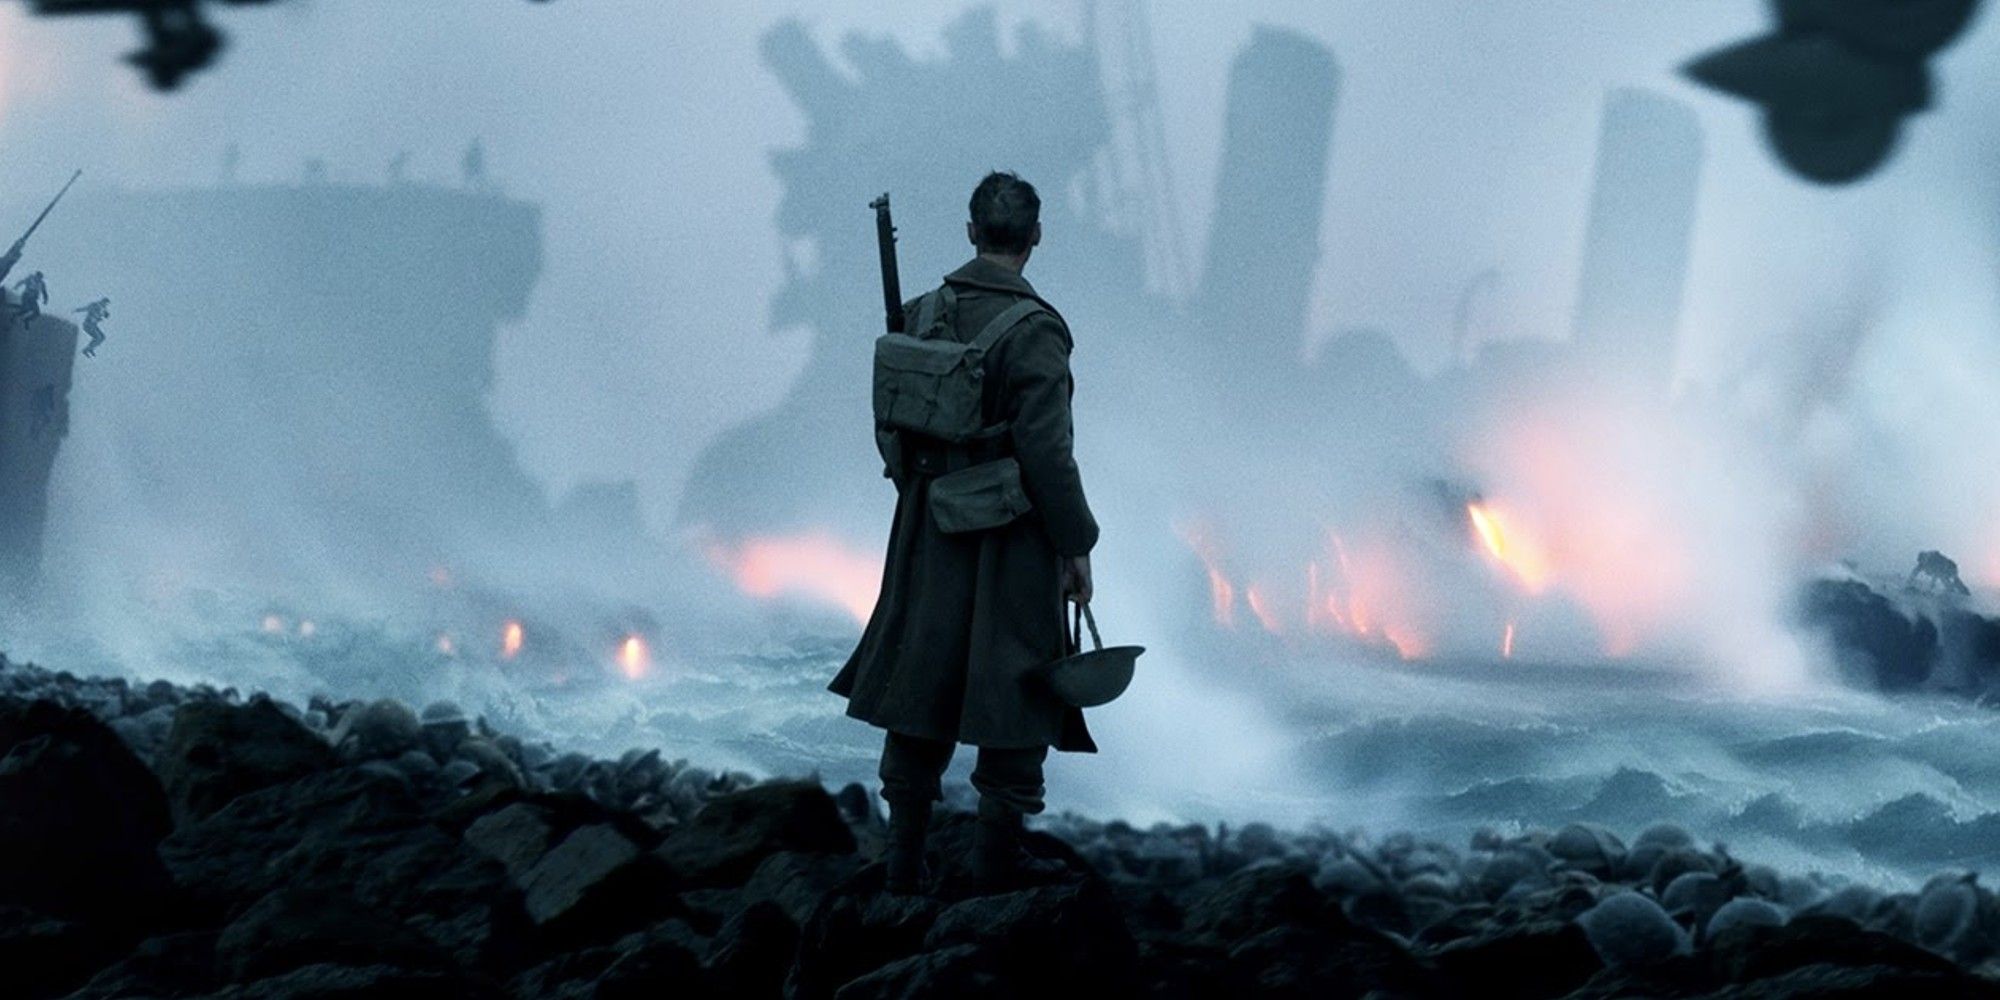 A landscape from 'Dunkirk'